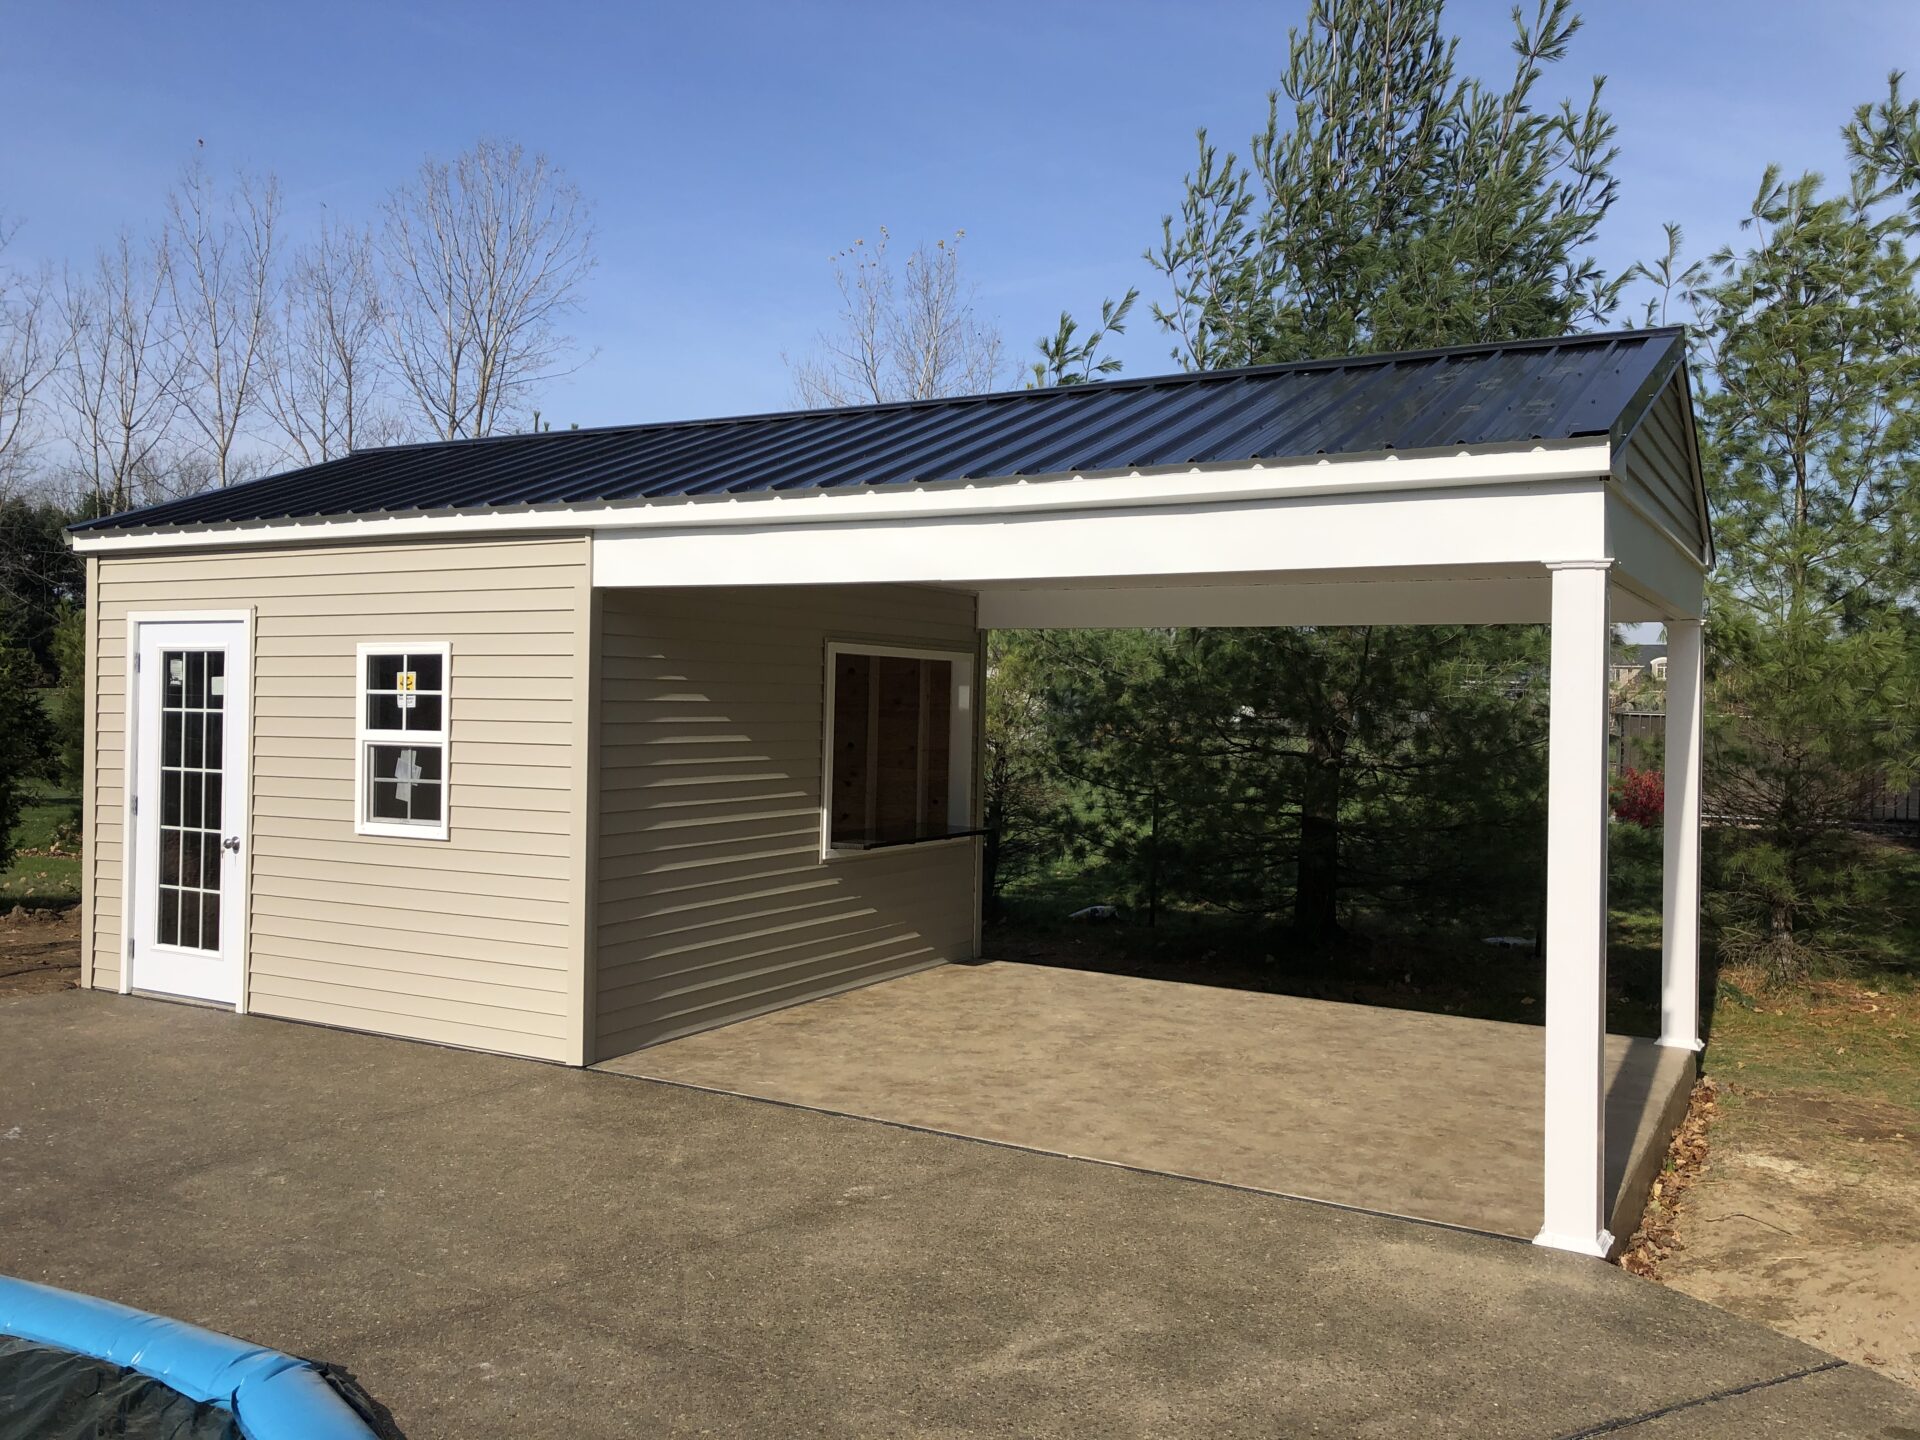 A carport with a metal roof and two windows.